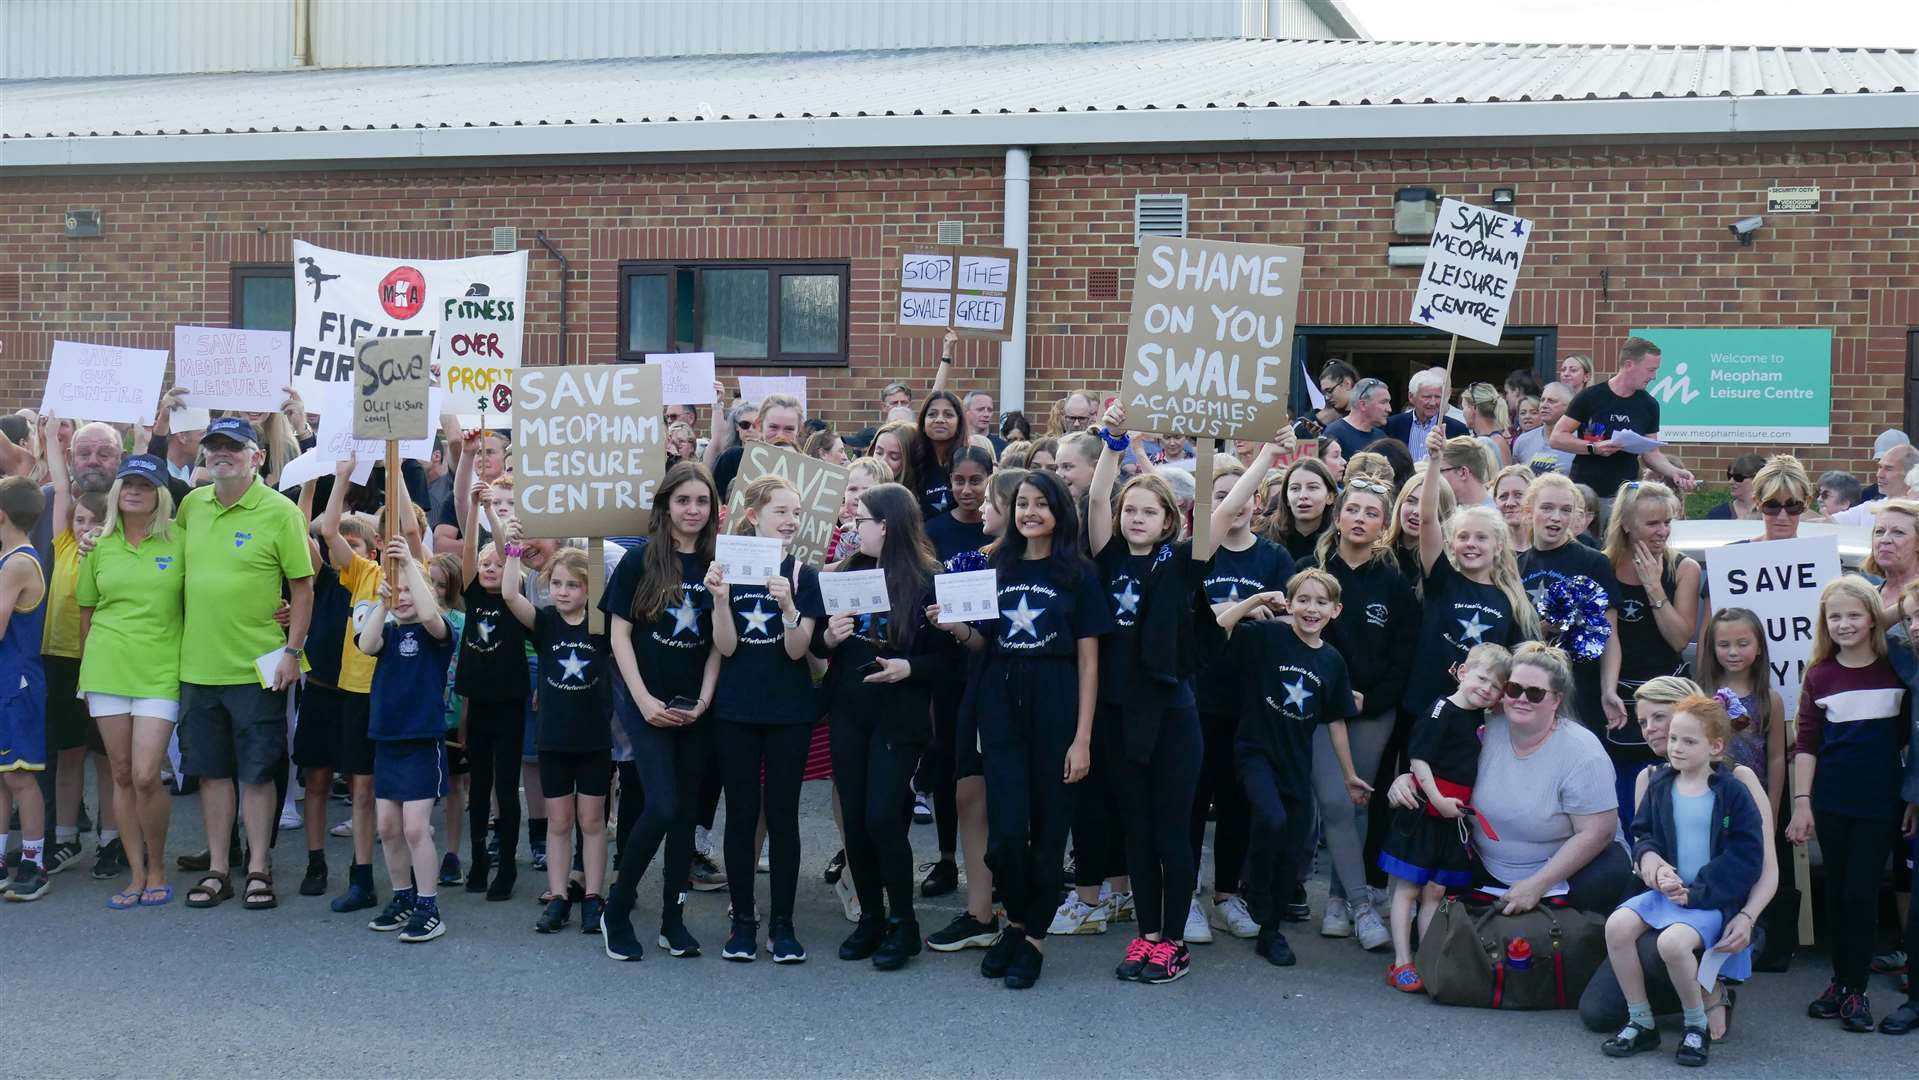 Protests have been held at Meopham Leisure Centre over its planned closure. Photo: Anna Roberts